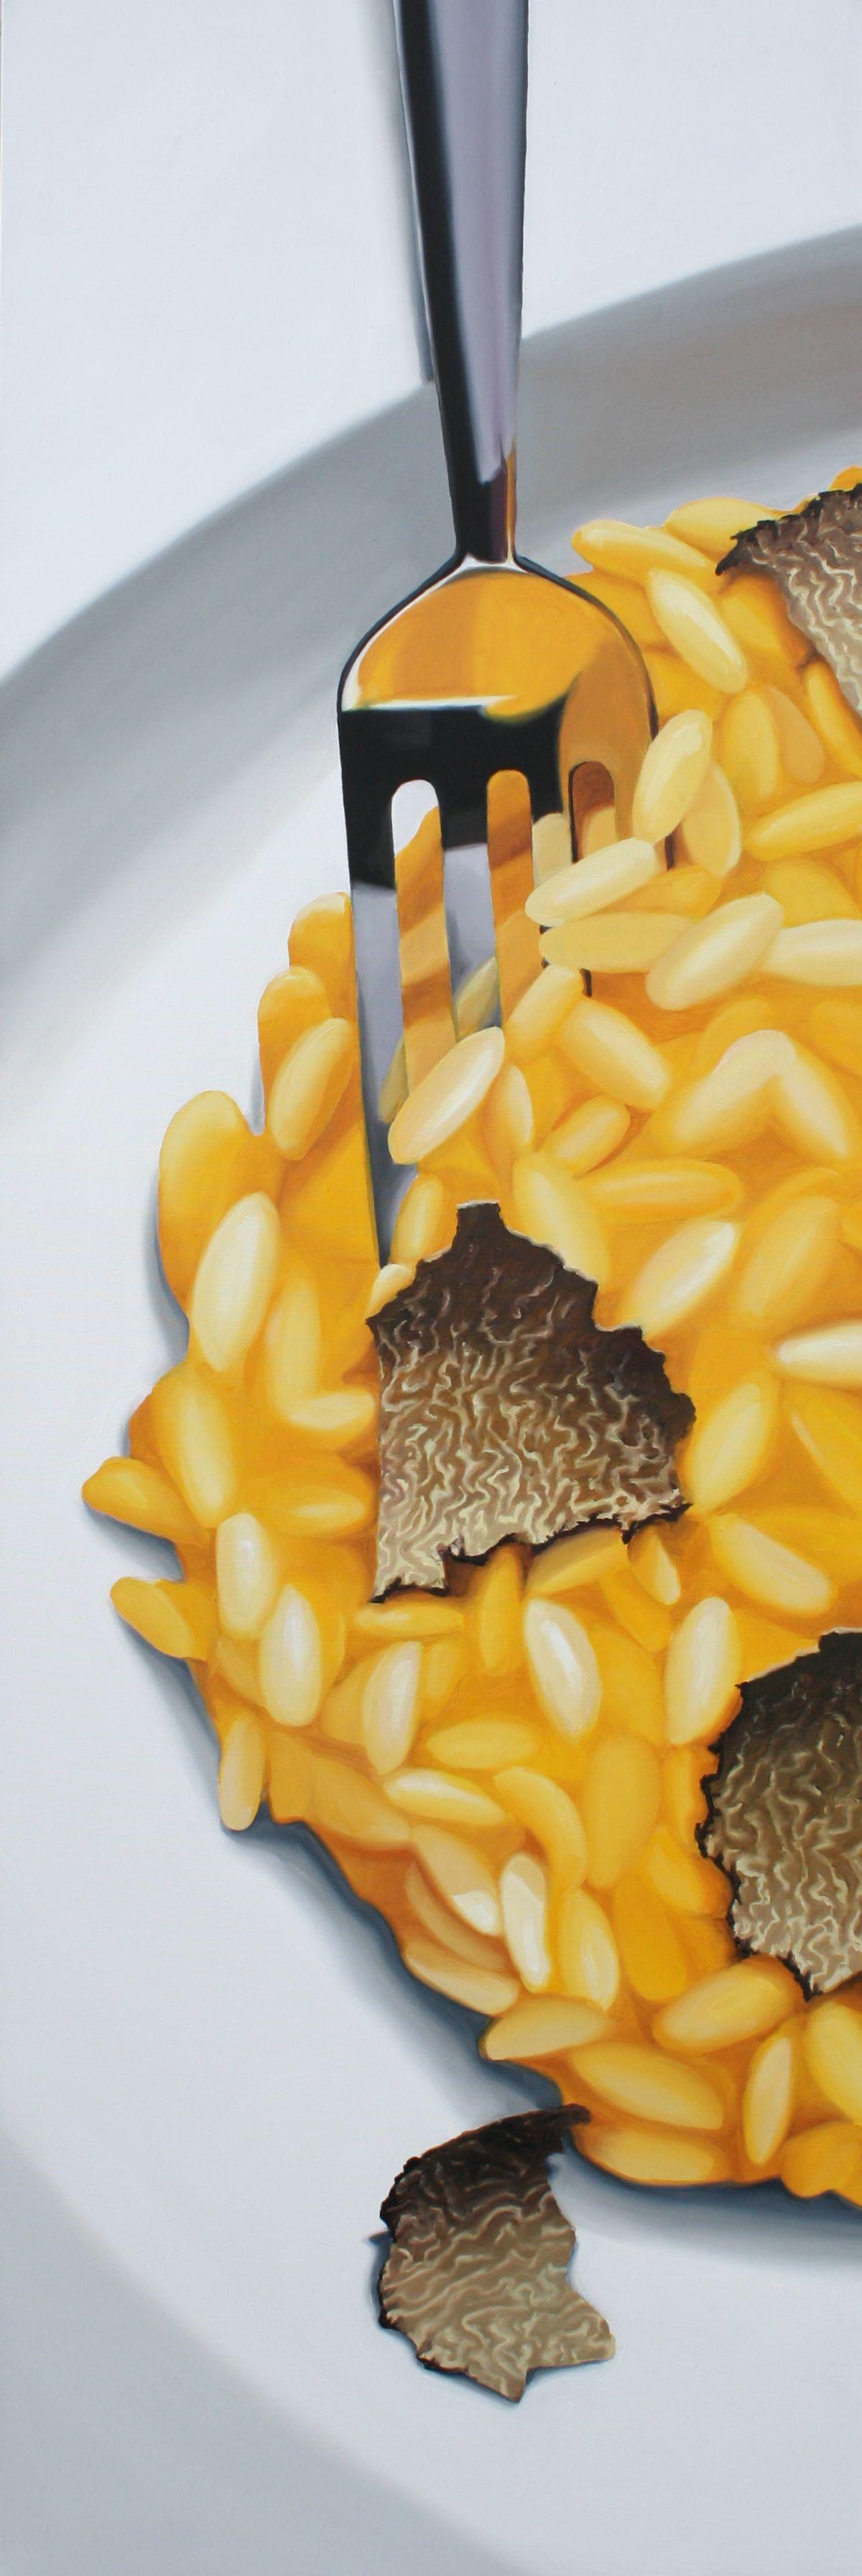 This painting was inspired by my grandfather.  He was born in Milano and is a very good cook, especially of risotto Milanese with saffron and truffles!! Whenever he cooks this marvel, on Sundays, there was a discussion in my family about the butter: